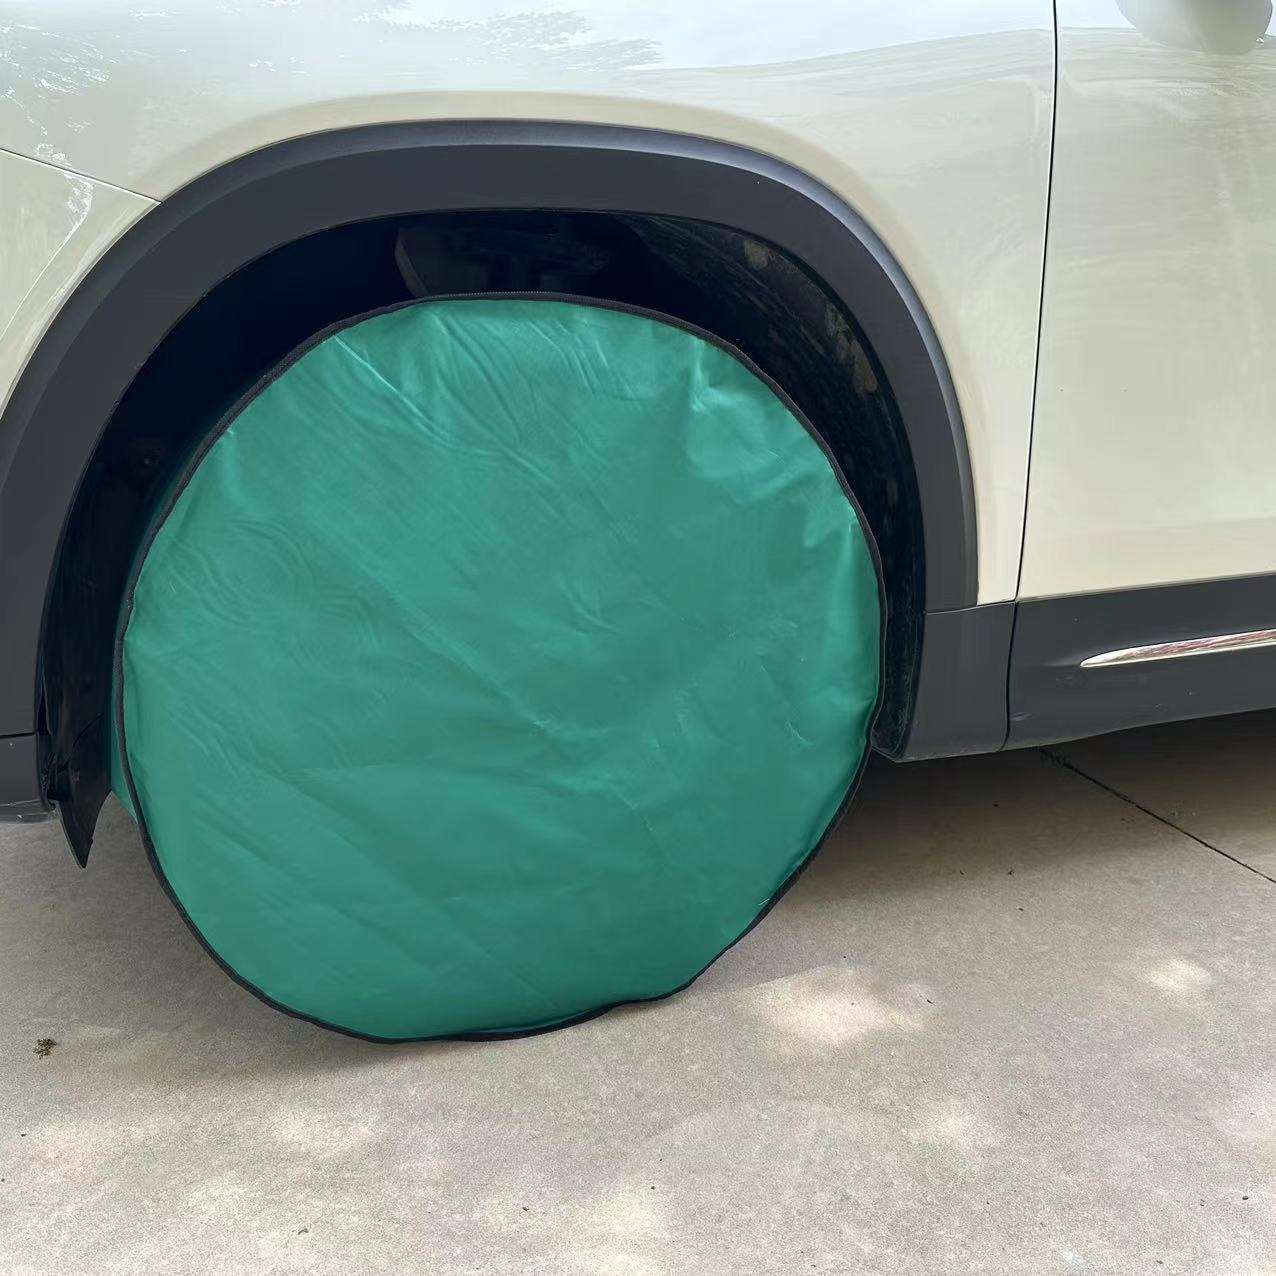 Oxford Thickened Cloth Tire Cover - Ultimate Wheel Protection